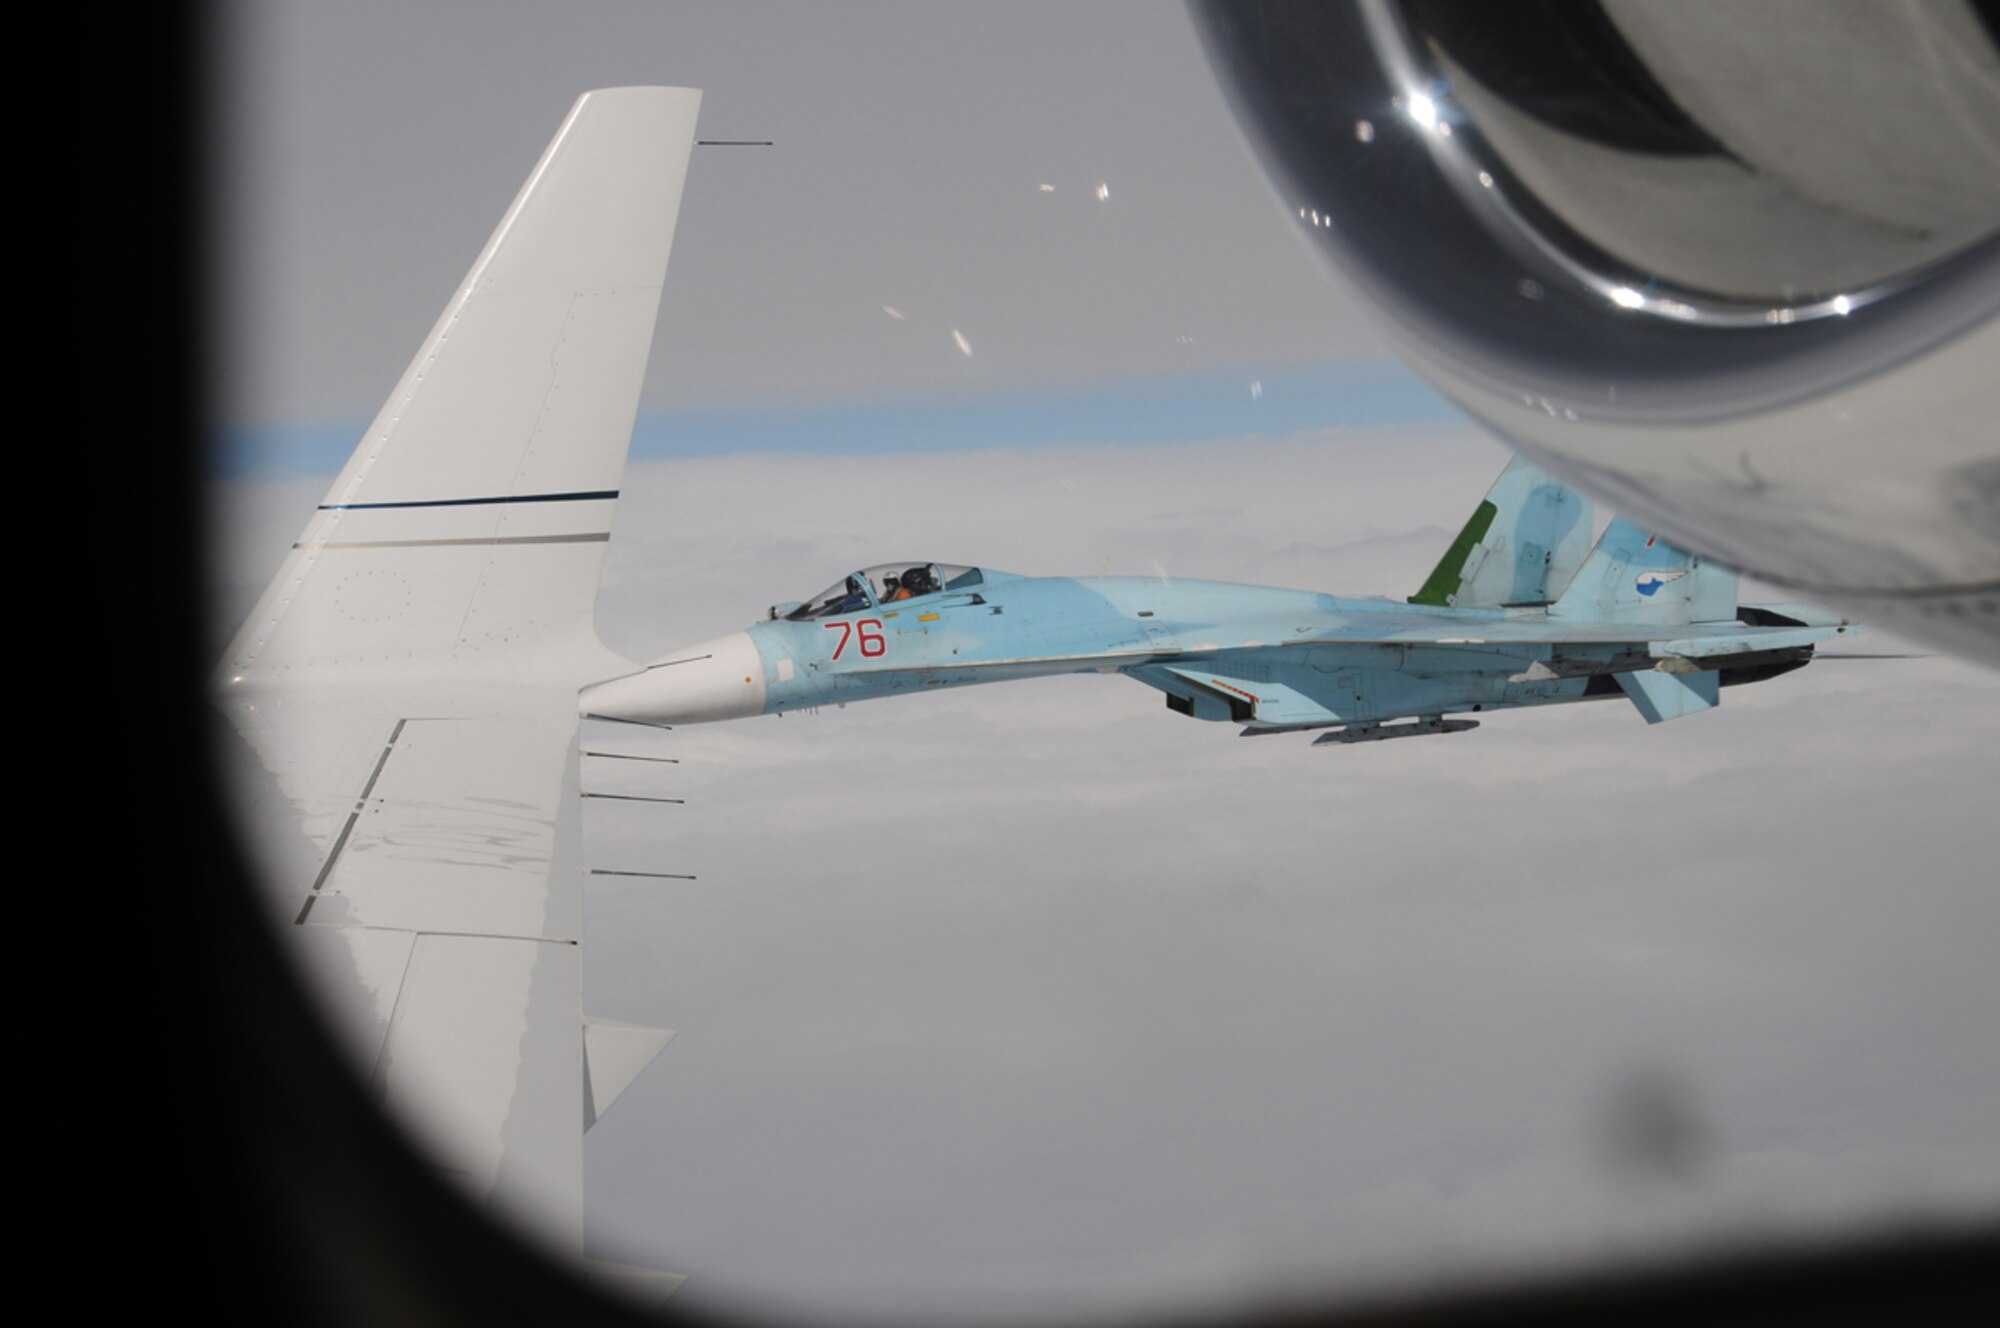 A Russian SU-27 Flanker, flying from Petropavlovsk-Kamchatski, intercepts Fencing 1220, a suspected hijacked aircraft during Exercise Vigilant Eagle Aug. 7.  Fighters and Airborne Warning and Control aircraft from the United States and Russia participated in Vigilant Eagle 2011.  The exercise marks the second year of cooperation between the Russian Federation and NORAD to counter possible threats of air terrorism crossing international boundaries.  (U.S. Air Force photo by Capt. Uriah Orland)